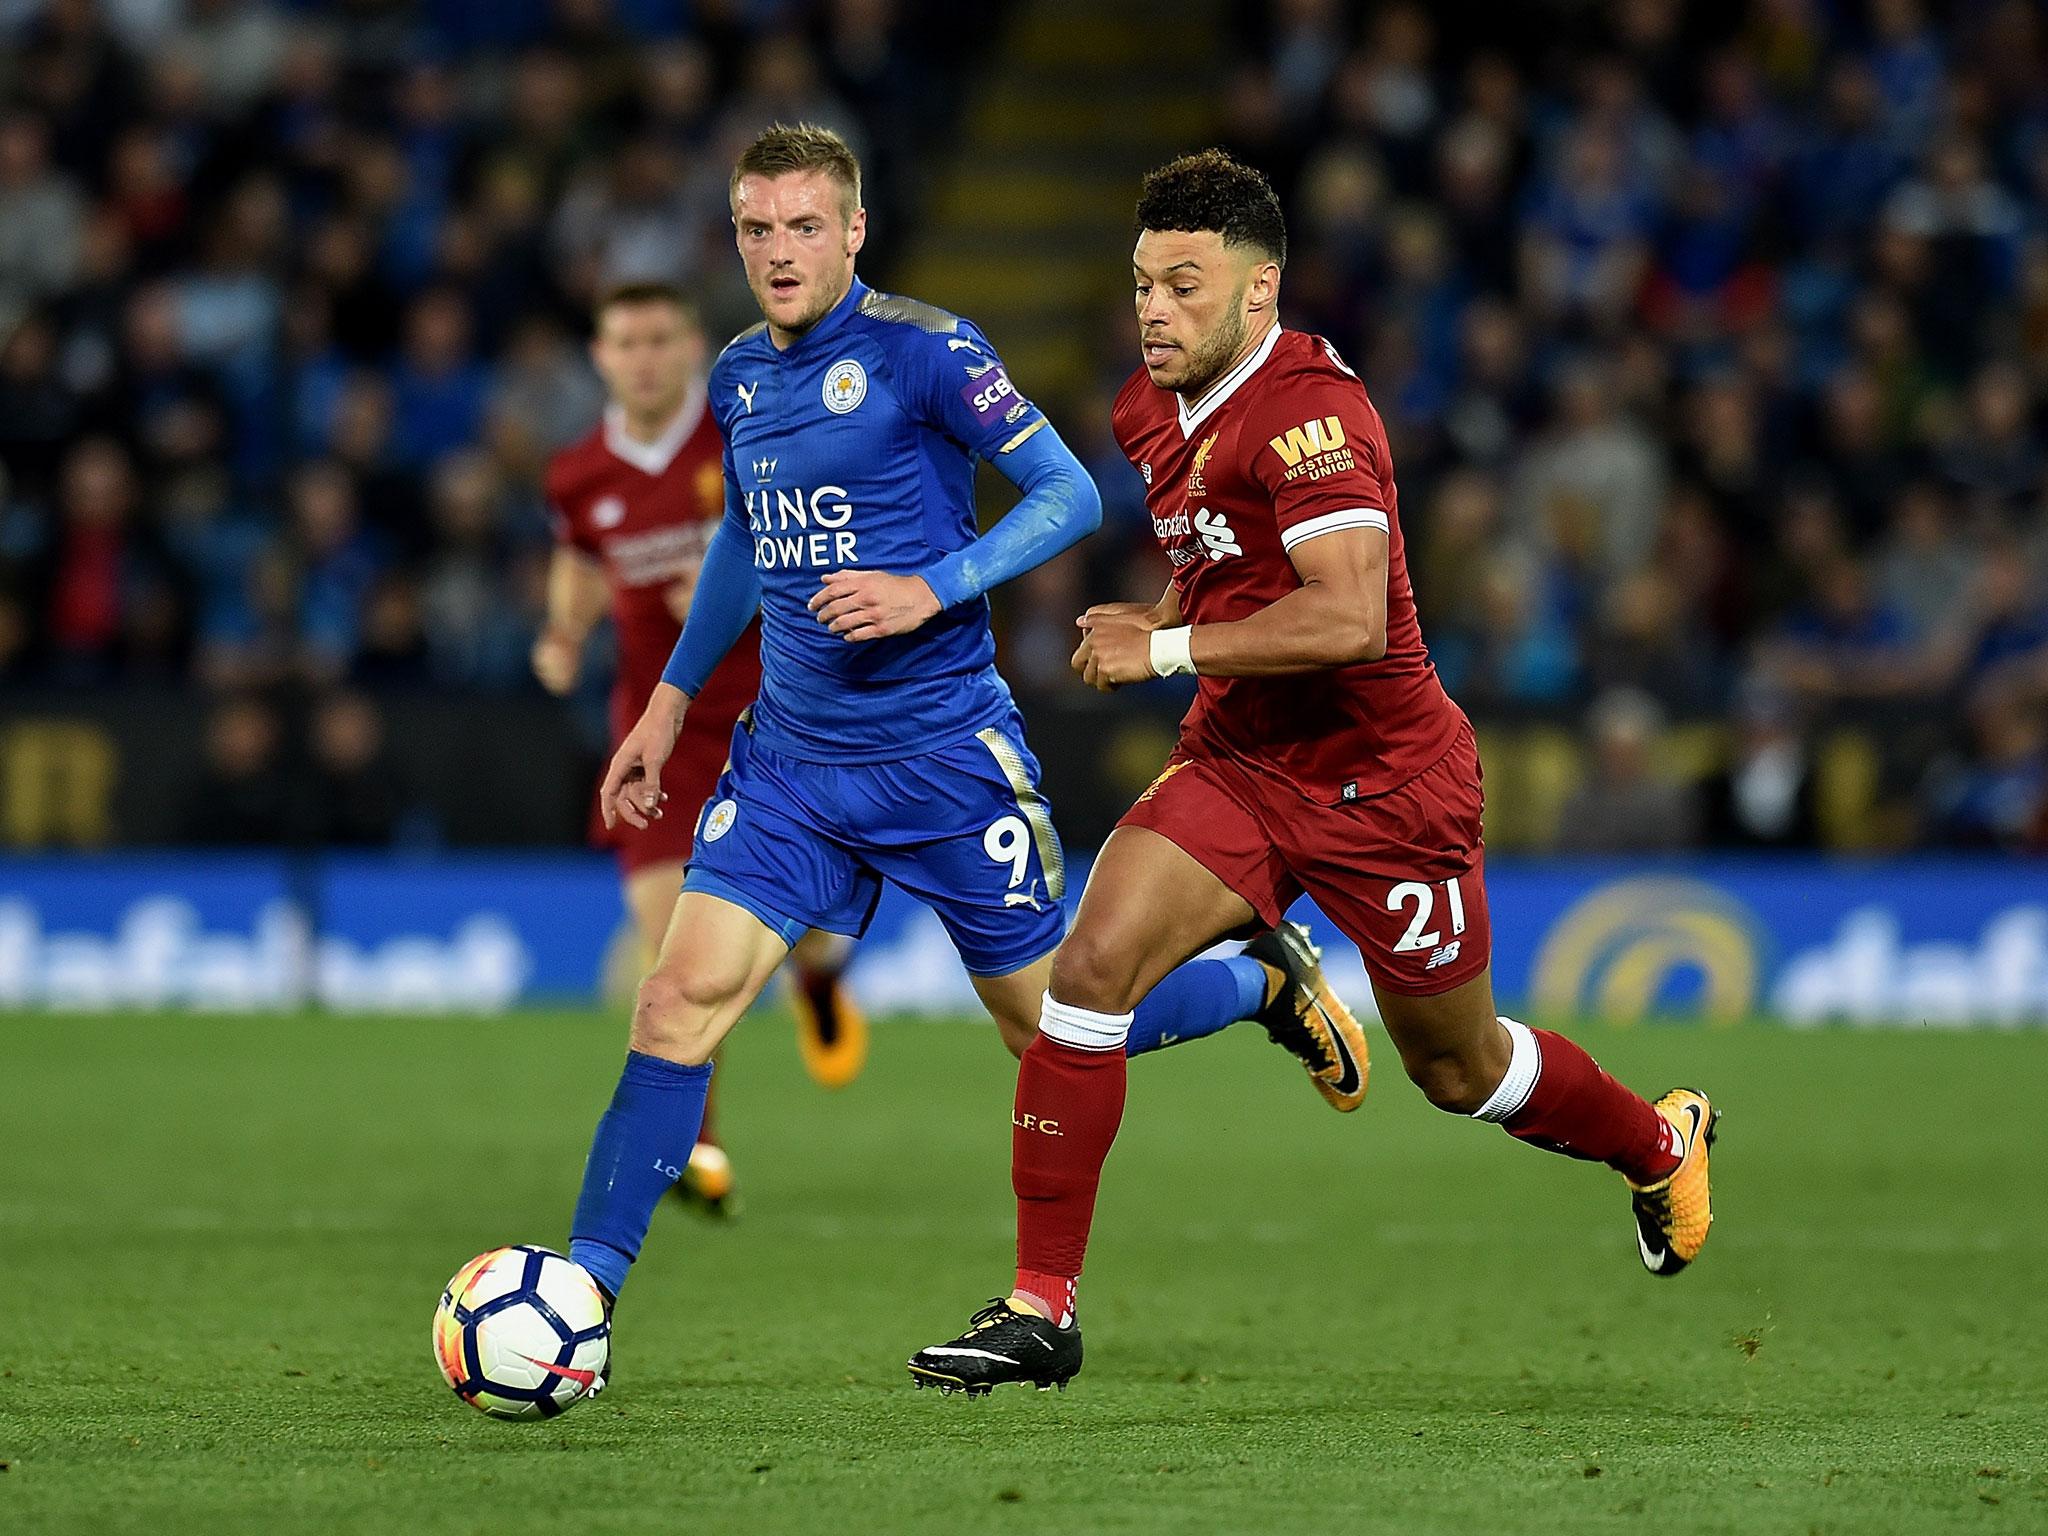 Liverpool won 3-2 in their last encounter with Leicester